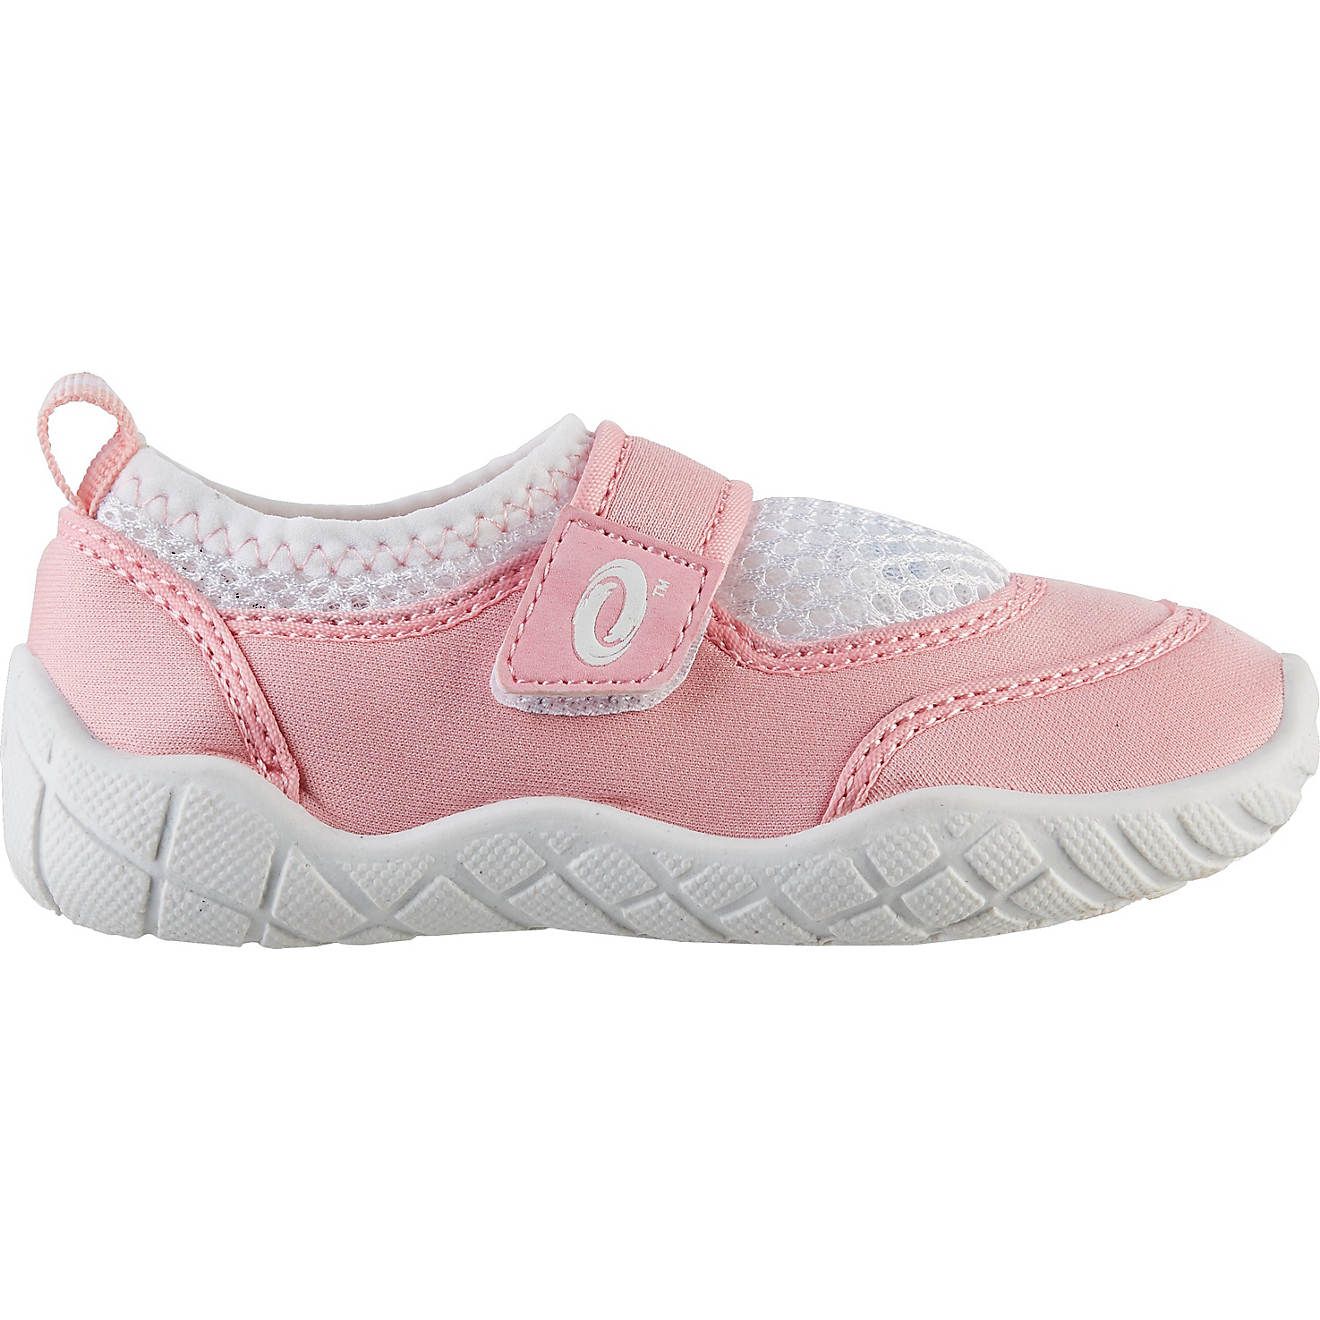 O'Rageous Toddlers' Aquasock II Water Shoes | Academy Sports + Outdoor Affiliate